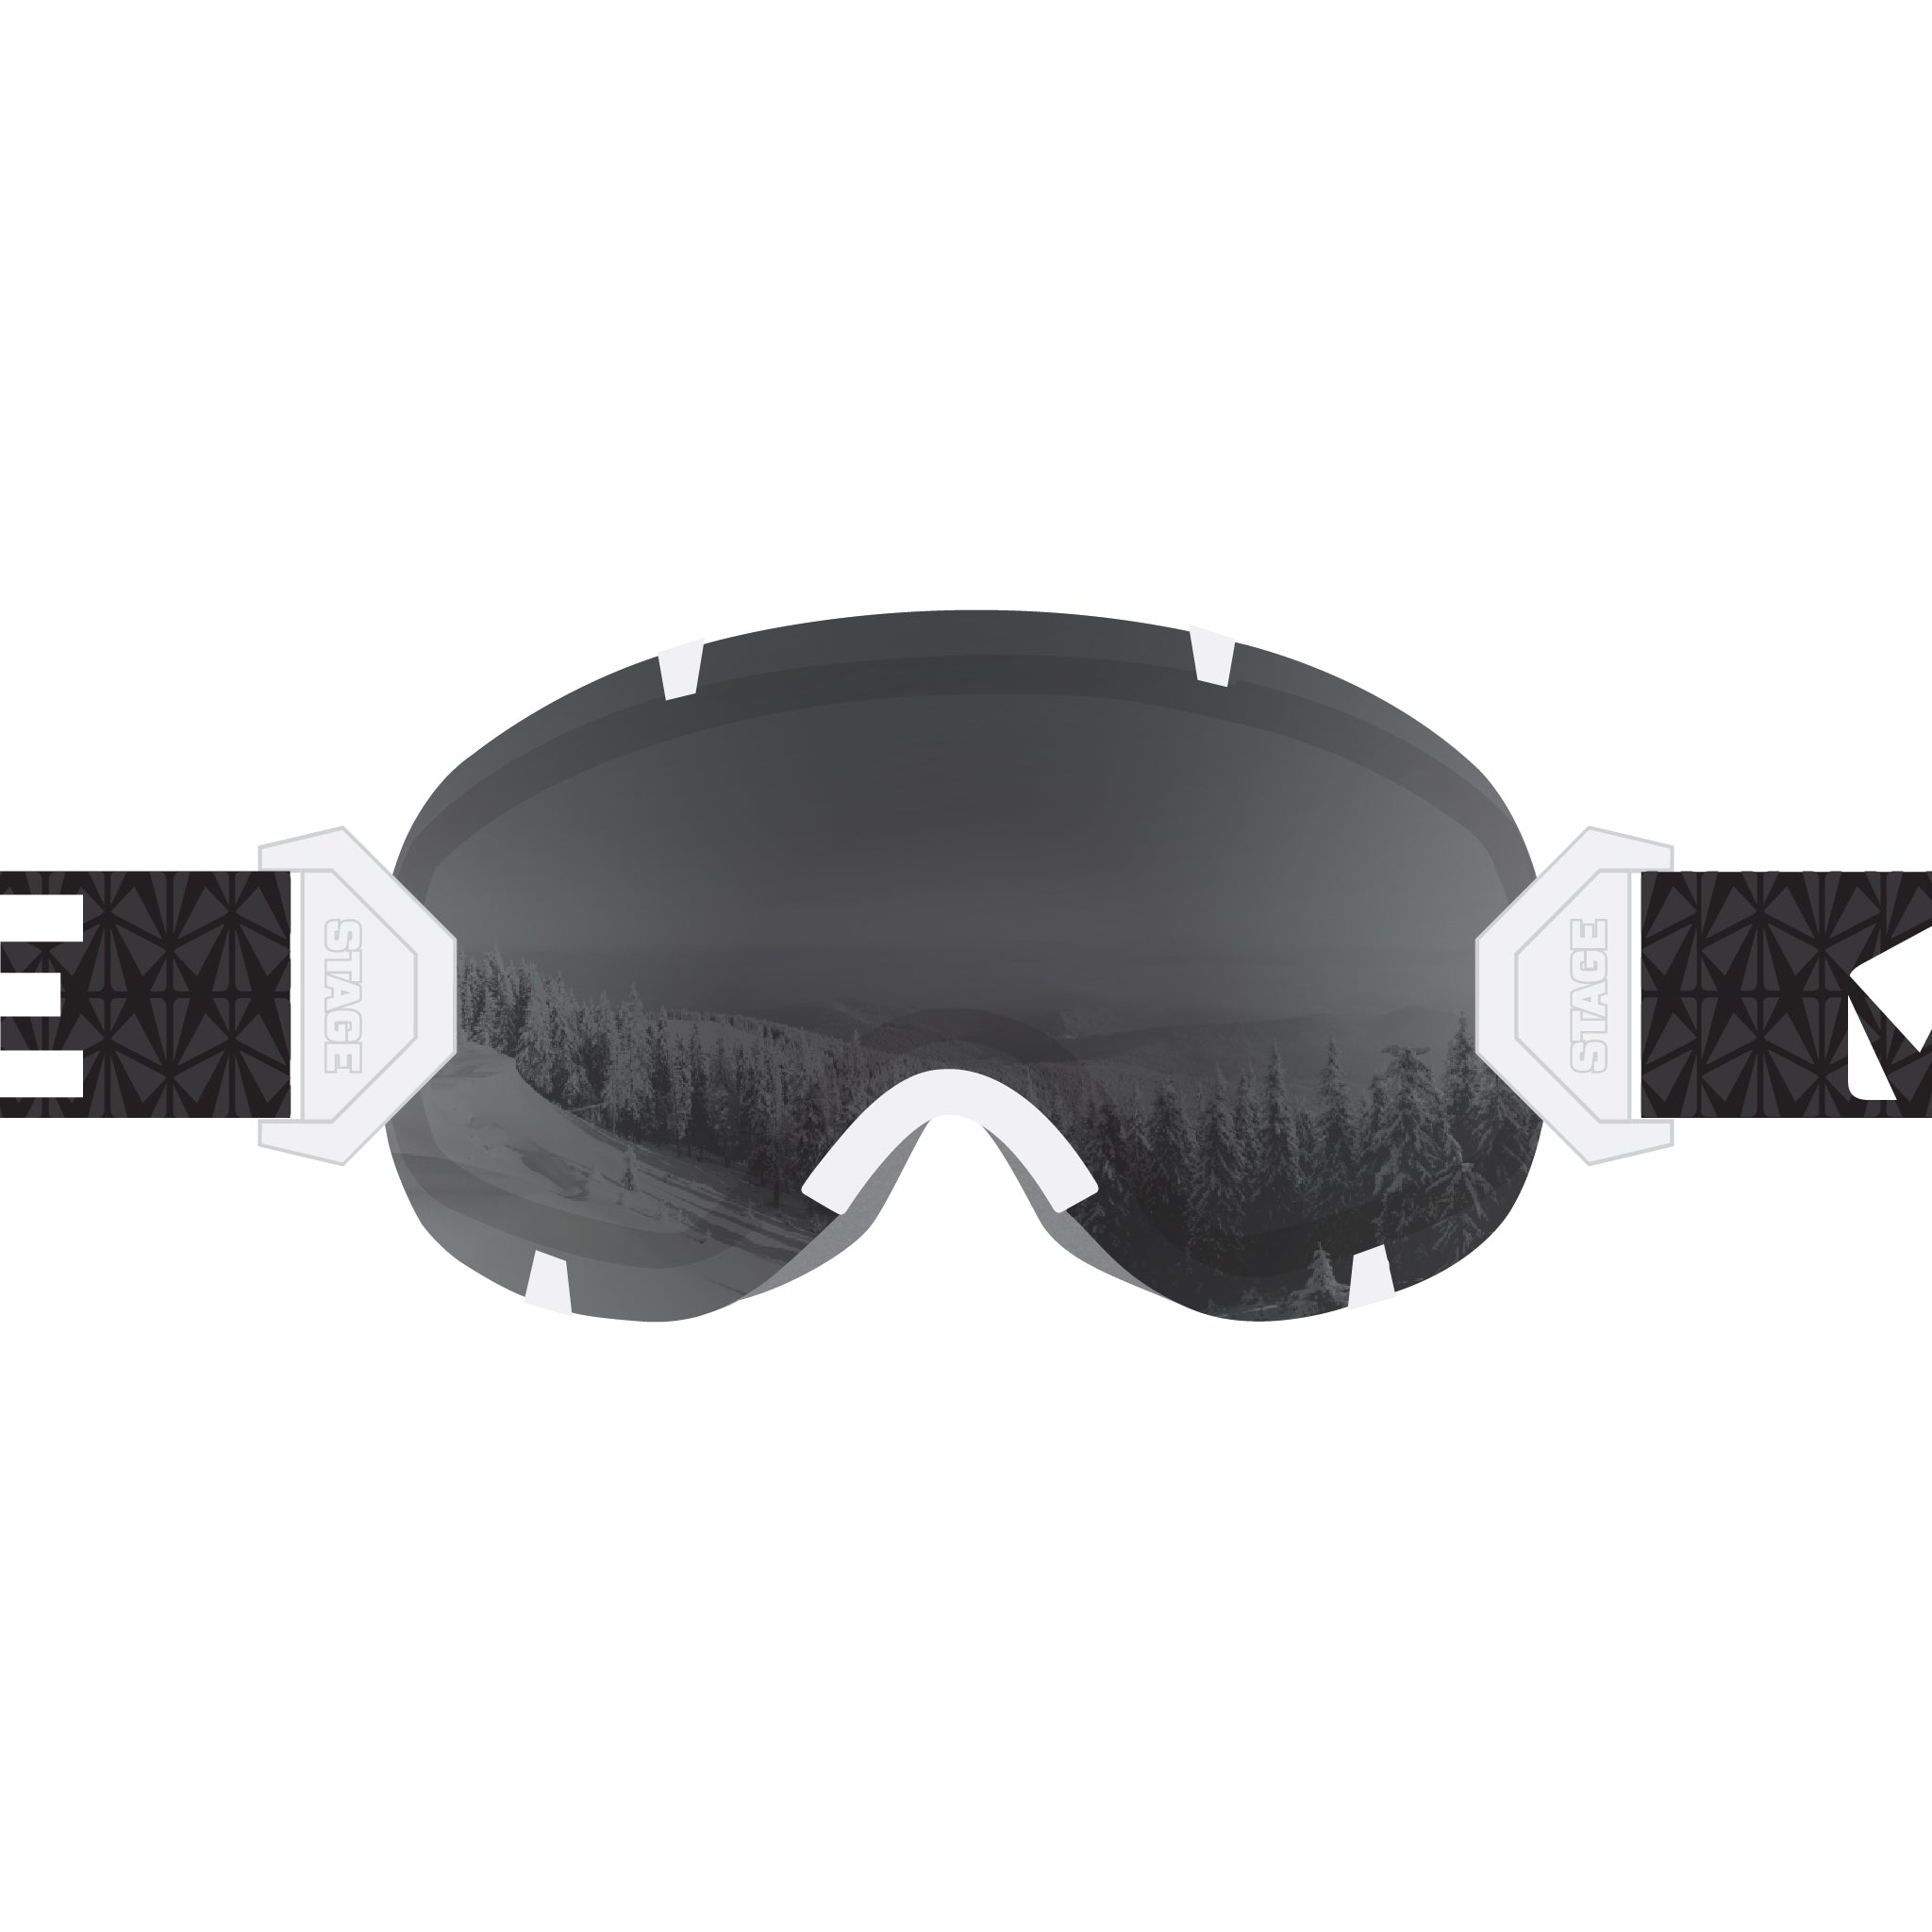 STAGE Stunt Ski Goggle Interchangeable Lens Strap - Black and 